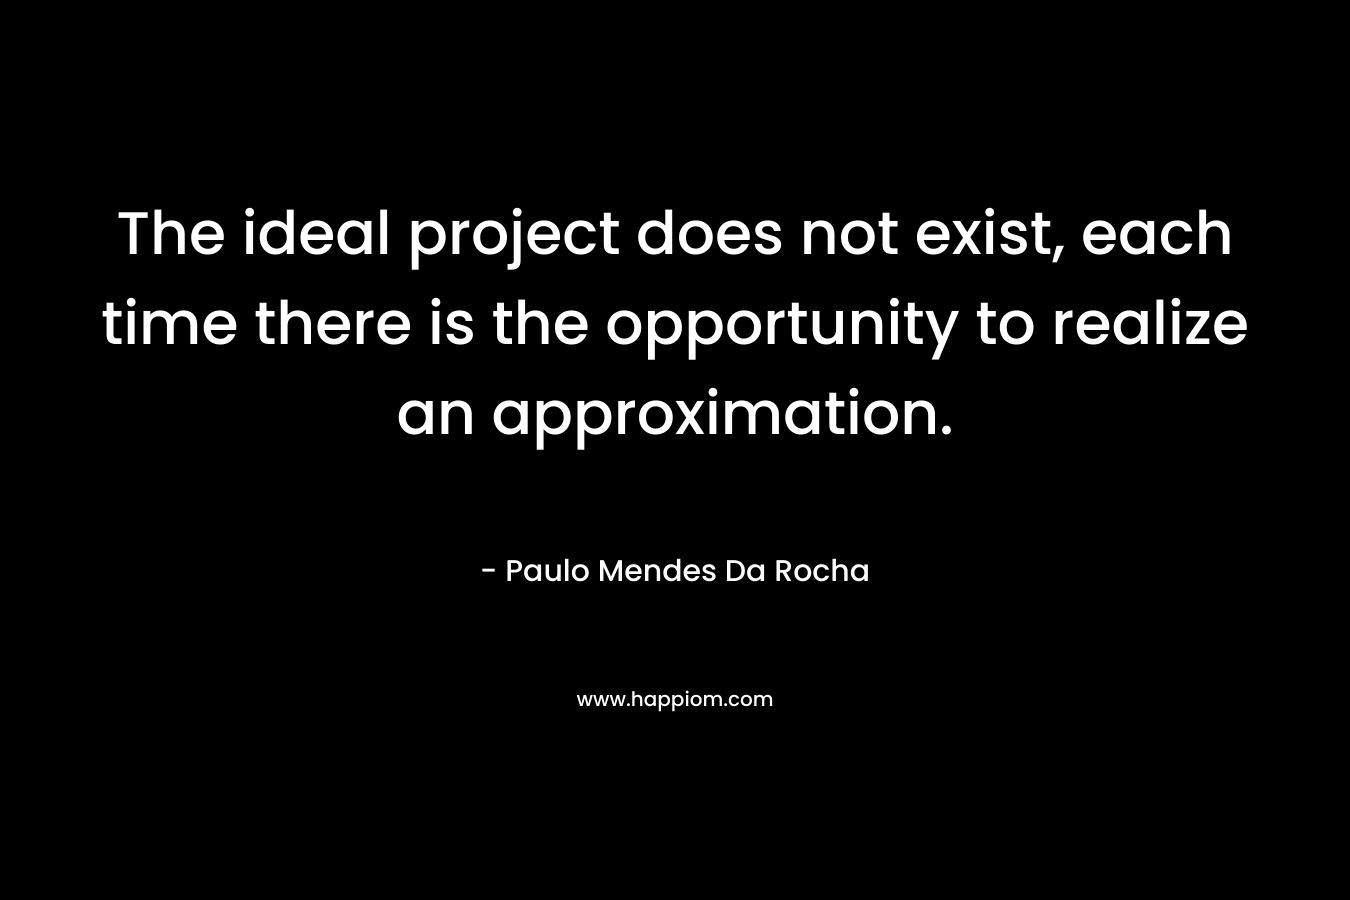 The ideal project does not exist, each time there is the opportunity to realize an approximation. – Paulo Mendes Da Rocha